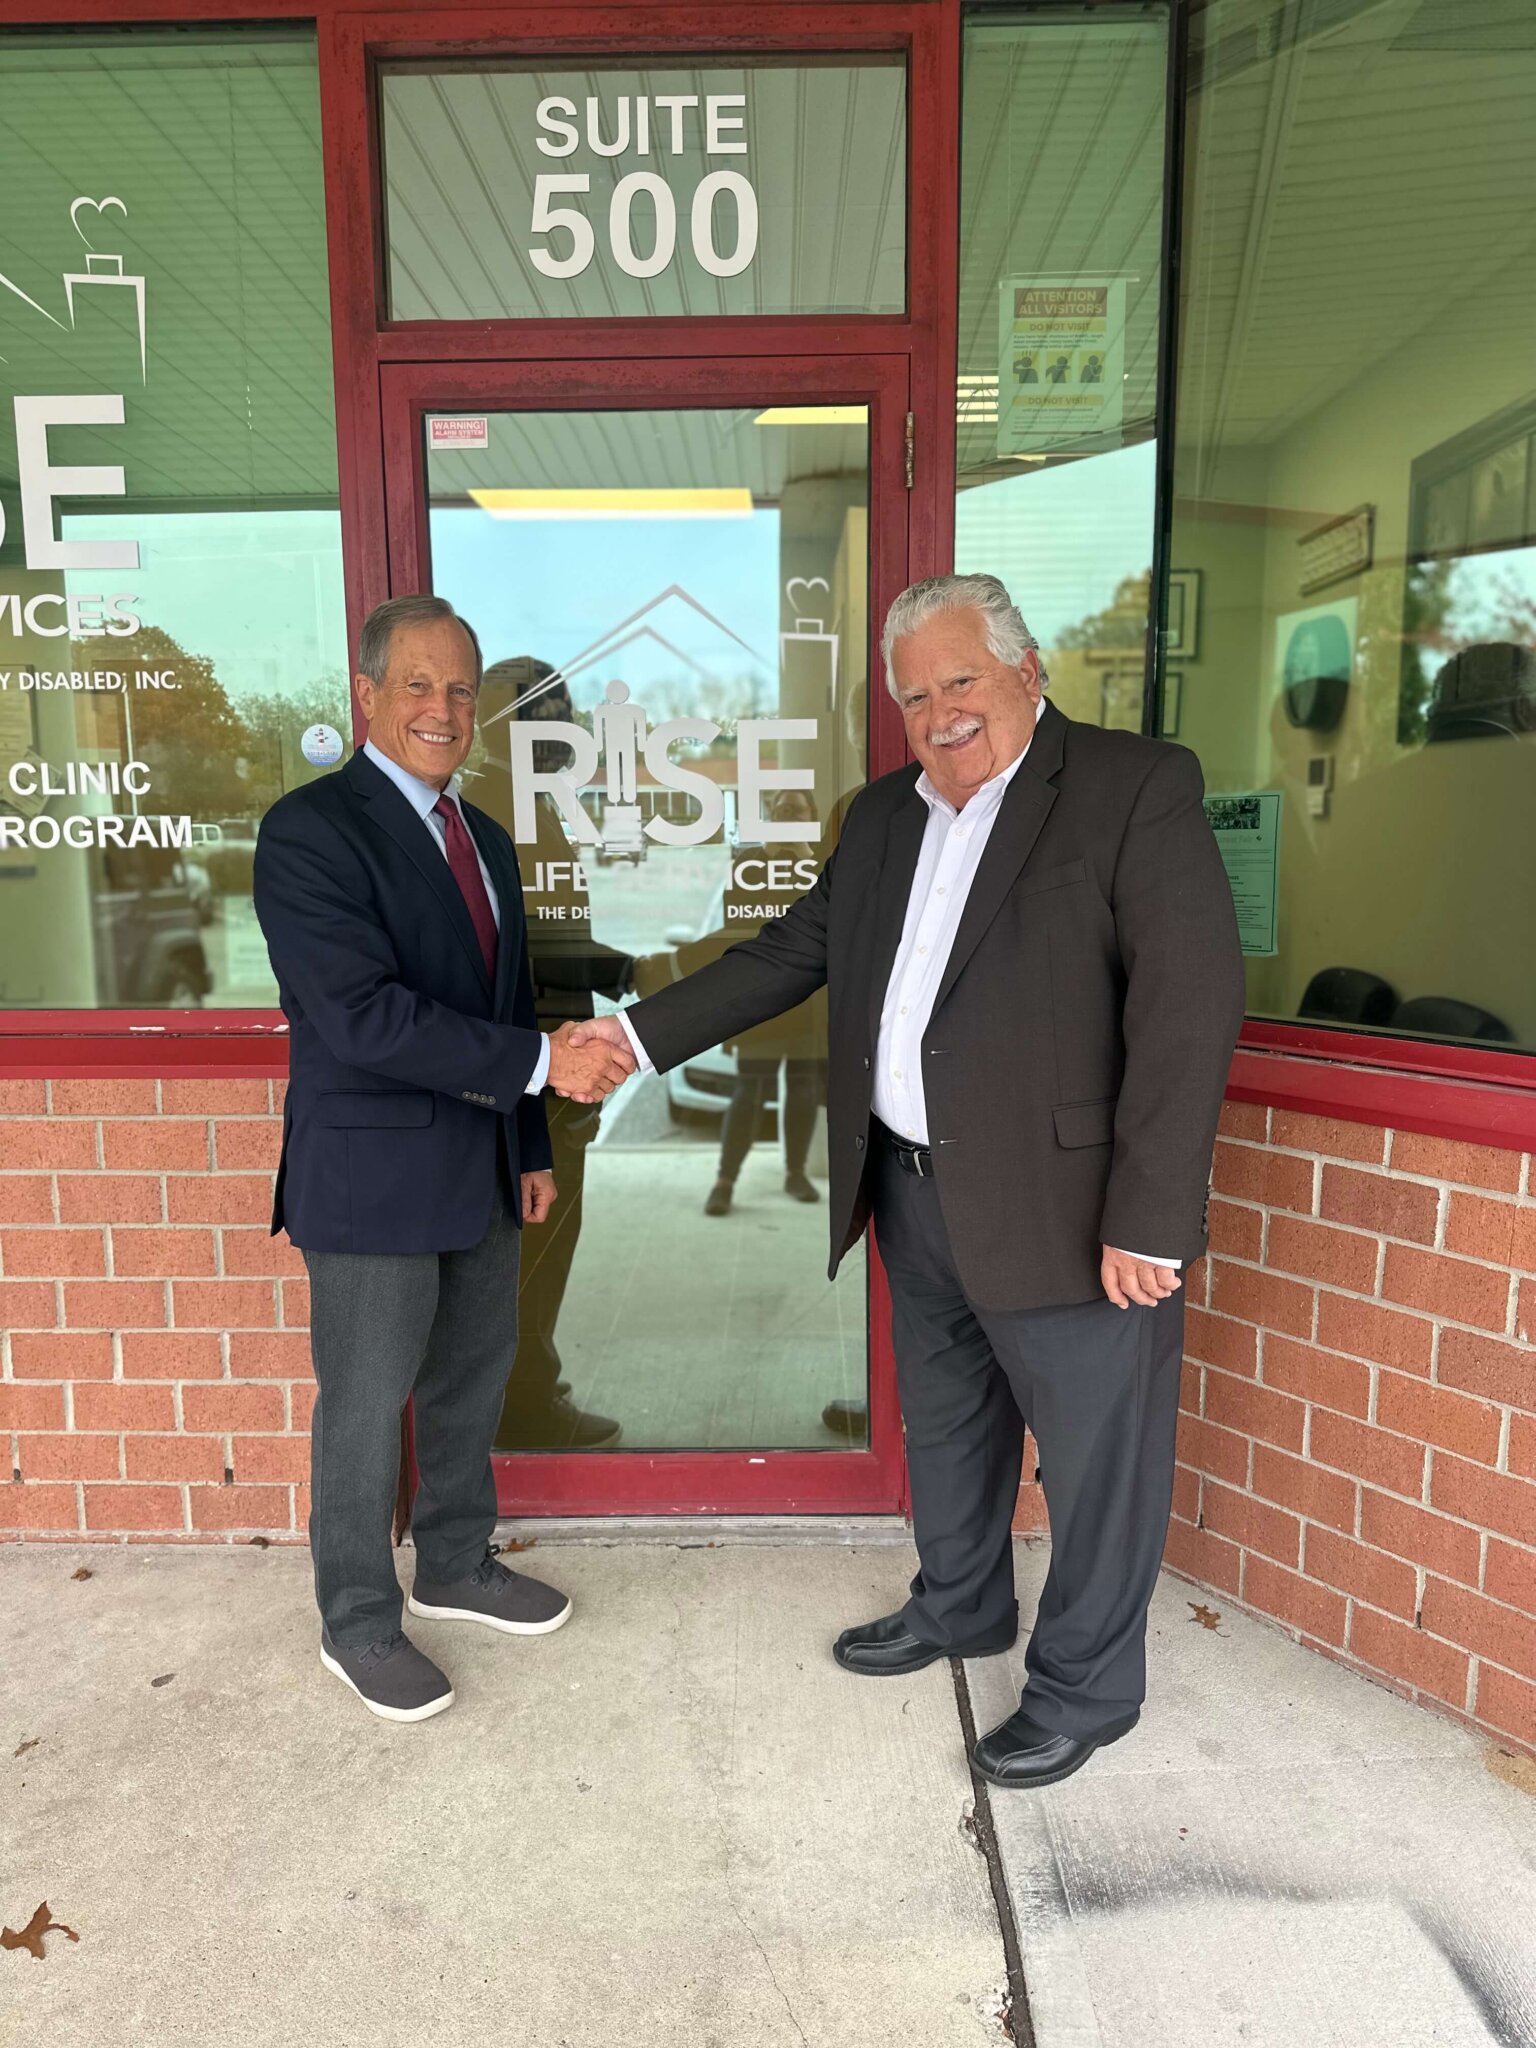 RISE Life Services Board President Gregory Blass with Executive Director Charles Evdos